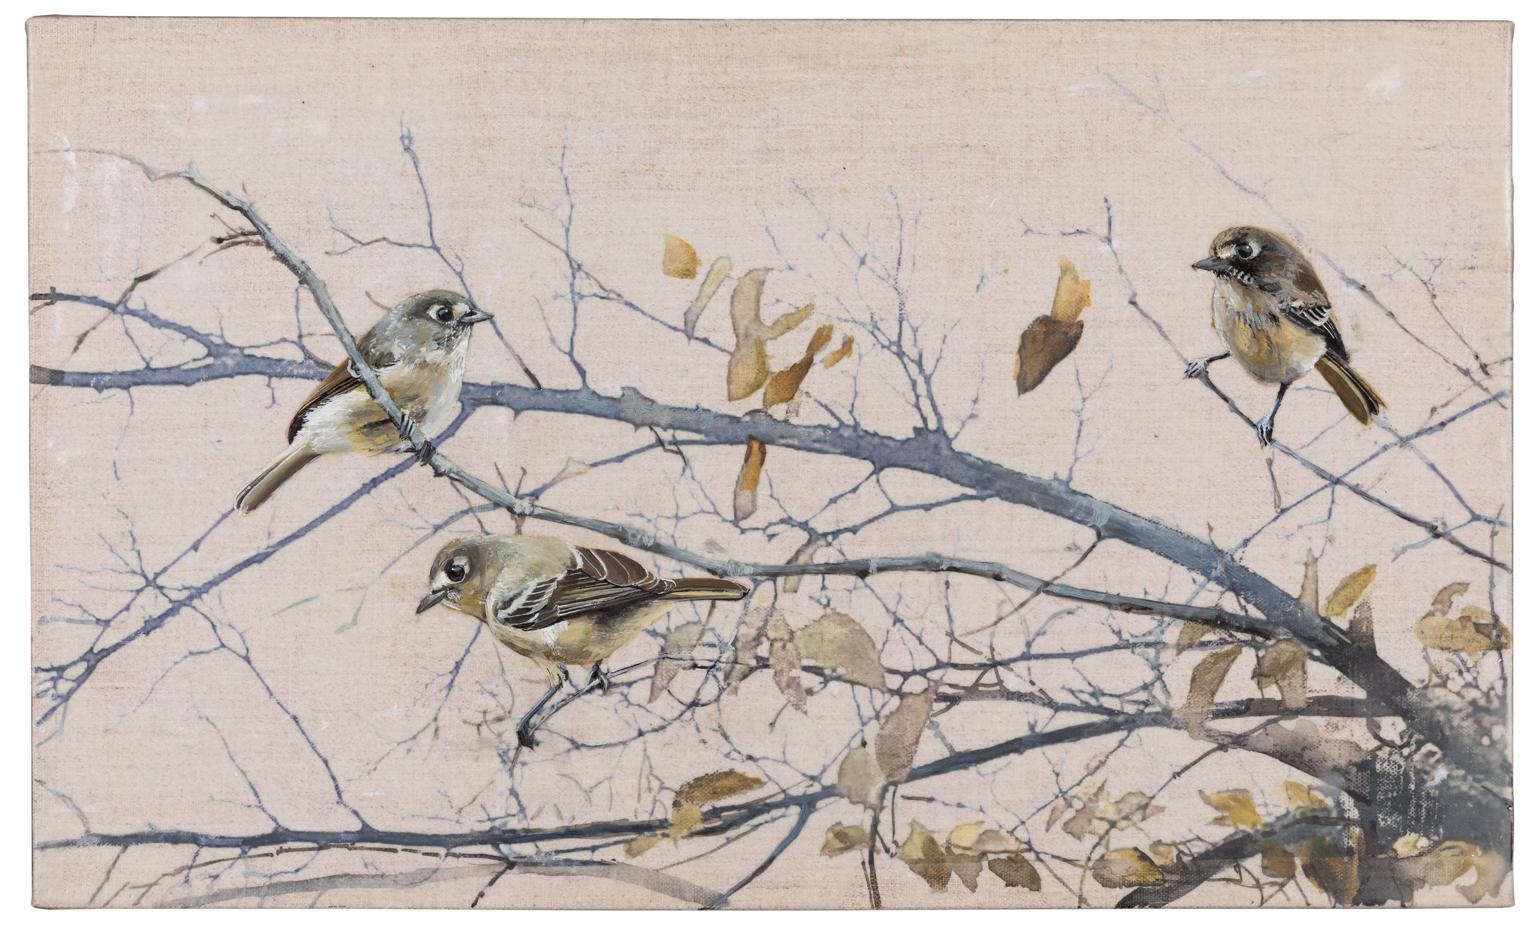 Spring Leaves I  - Encaustic and Oil Painting of Birds in a Tree Contemporary  - Mixed Media Art by Diana Majumdar